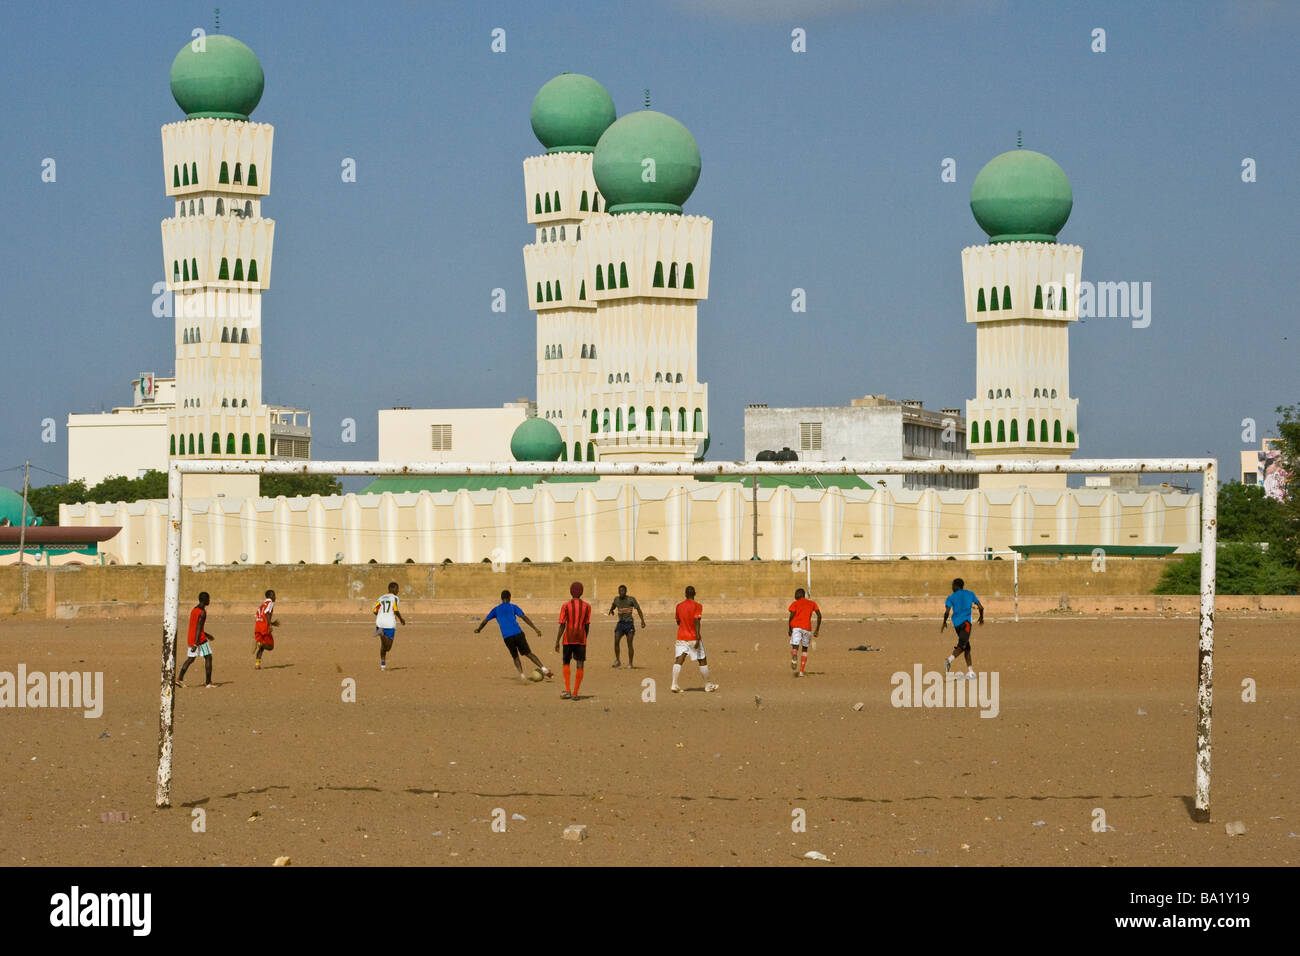 Football in front of a Mosque in Dakar Senegal Stock Photo